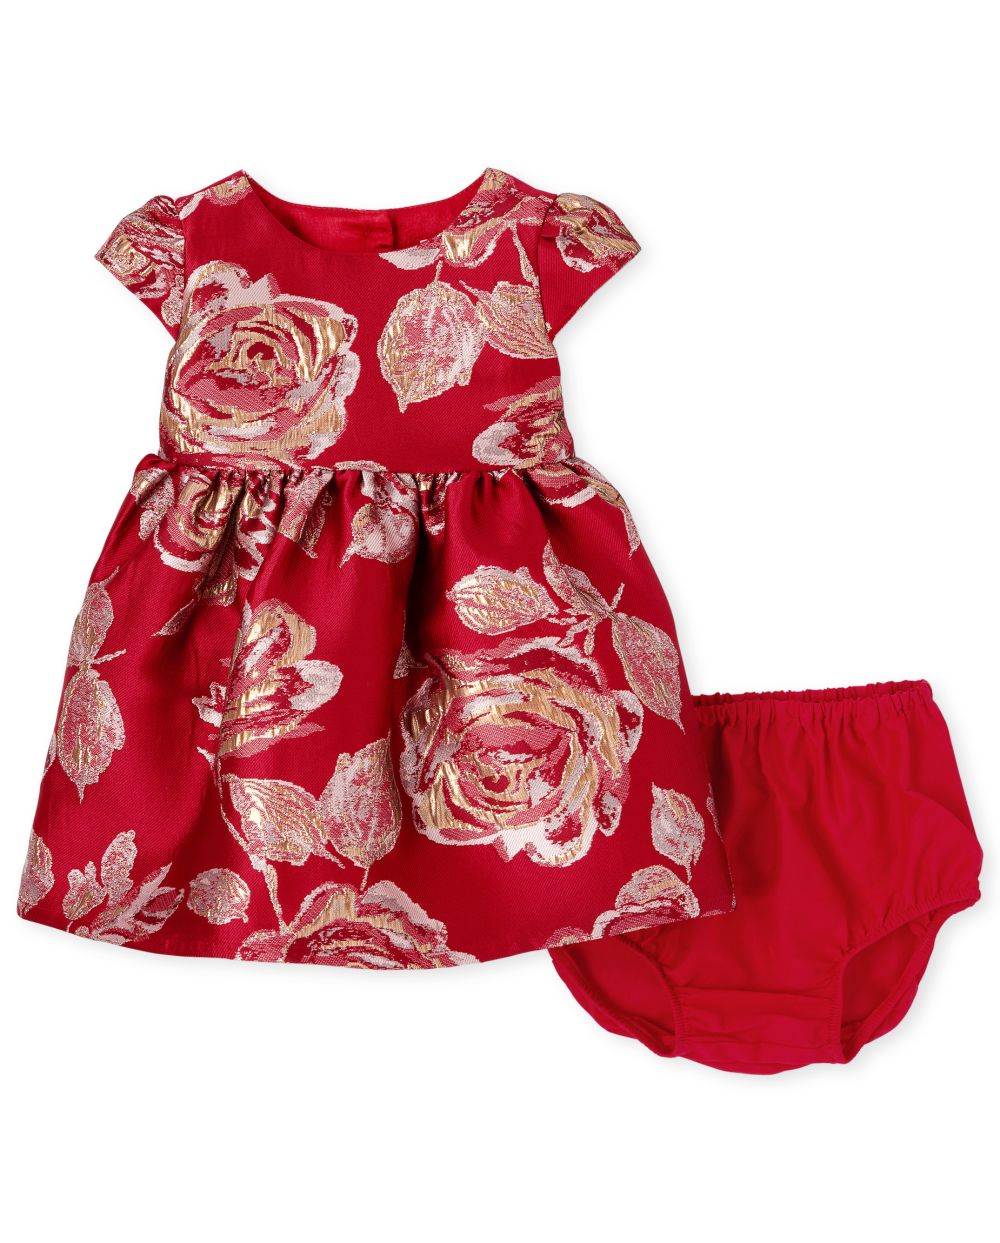 

Newborn Baby Mommy And Me Metallic Rose Jacquard Matching Dress - Red - The Children's Place